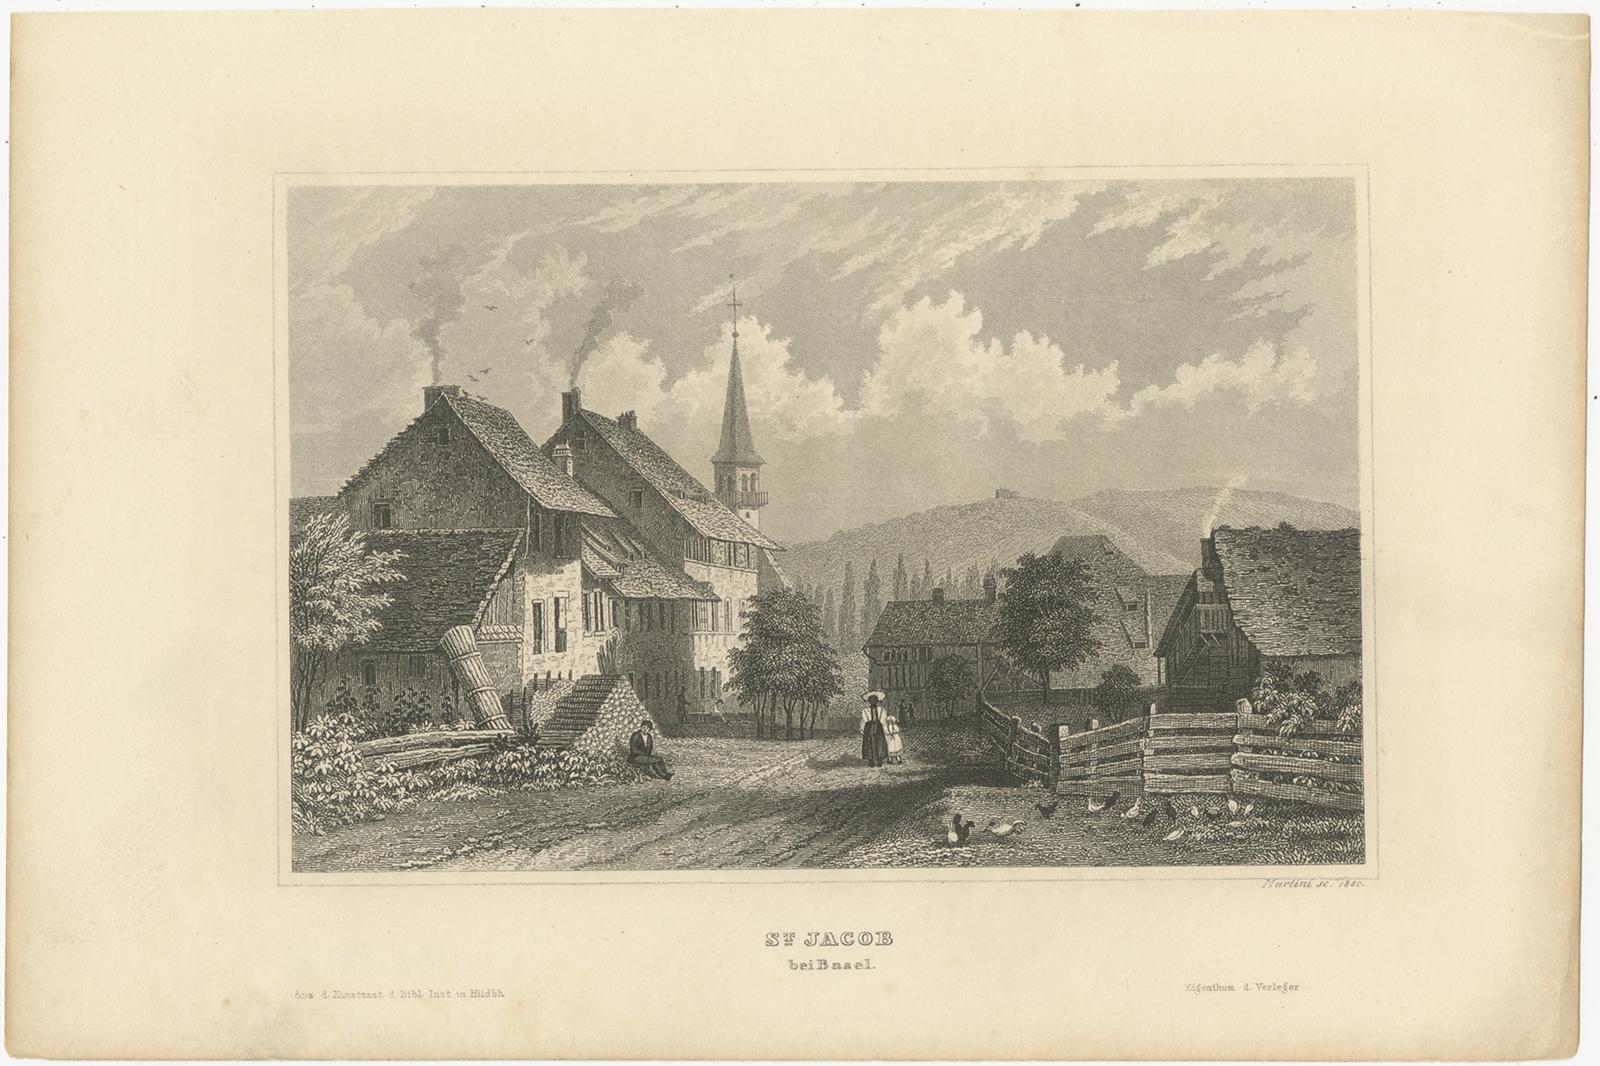 Antique print titled 'St. Jacob, bei Basel'. View of St. Jacob, near Basel, Switzerland. Originates from 'Meyers Universum'. Published circa 1850.

Joseph Meyer (May 9, 1796 - June 27, 1856) was a German industrialist and publisher, most noted for